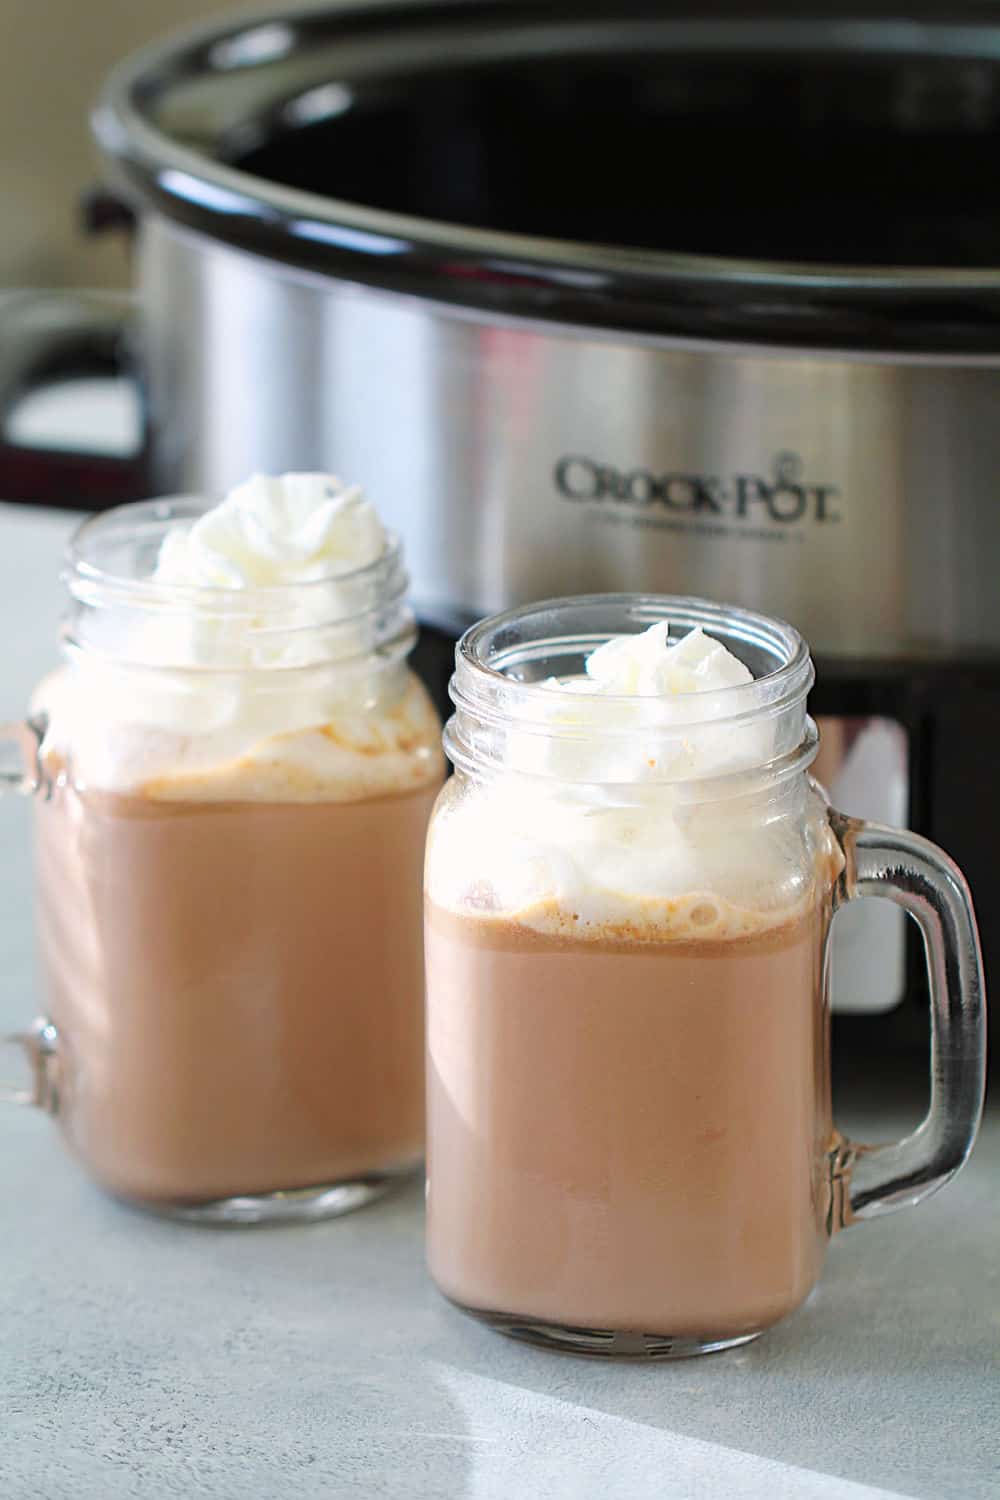 https://www.sixsistersstuff.com/wp-content/uploads/2021/12/Homemade-Slow-Cooker-Hot-Chocolate-Drink-on-SixSistersStuff.jpg